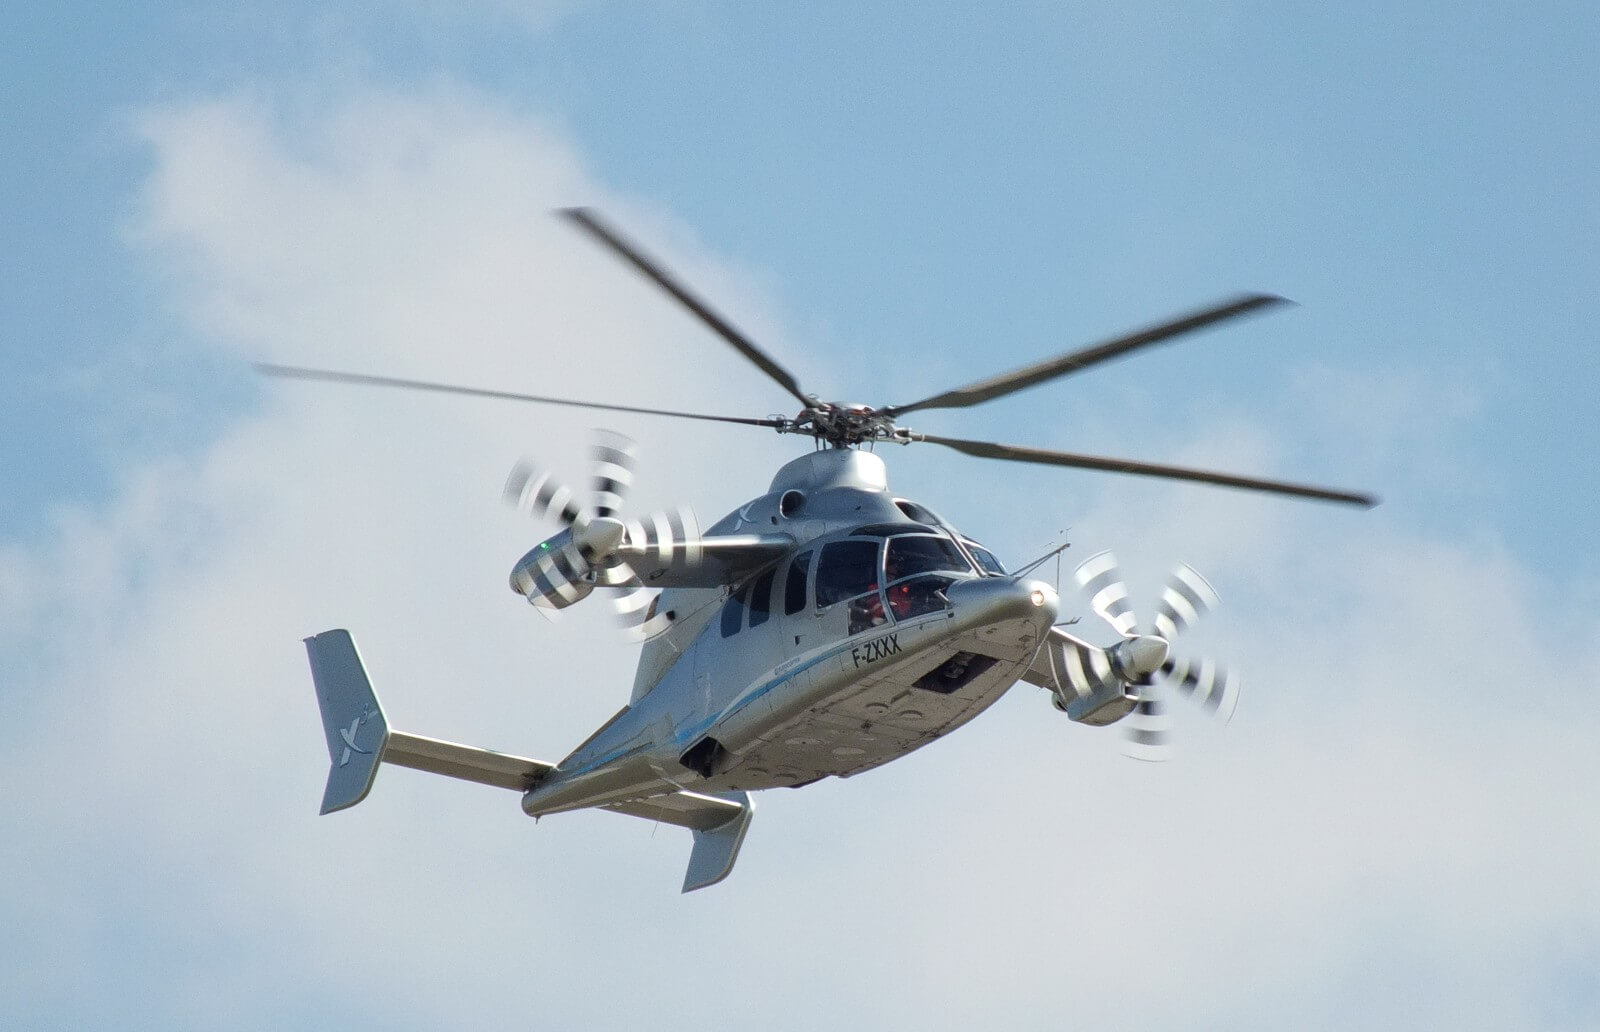 The Eurocopter X³—the fastest helicopter in the world.